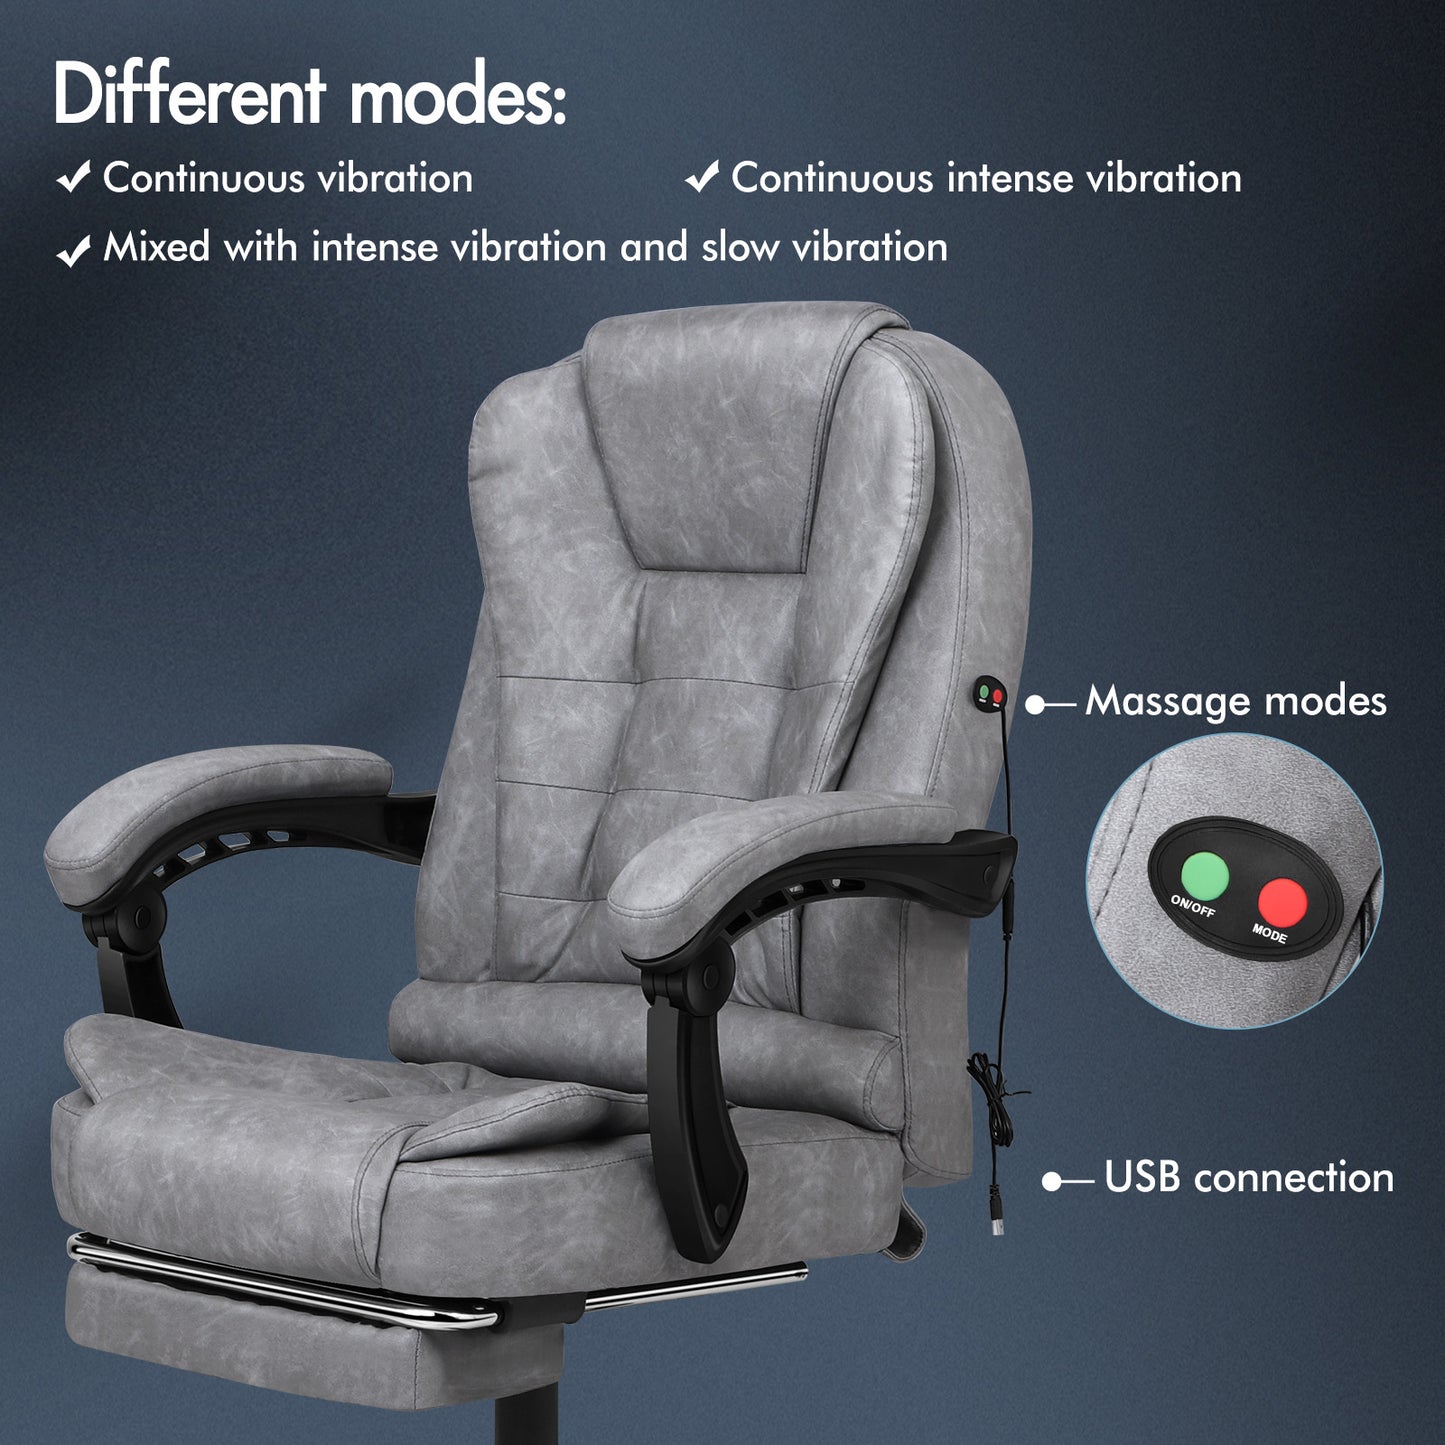 ELFORDSON Massage Office Chair with Footrest Executive Gaming Seat Upgraded Pull-up PU Leather, Vintage Grey